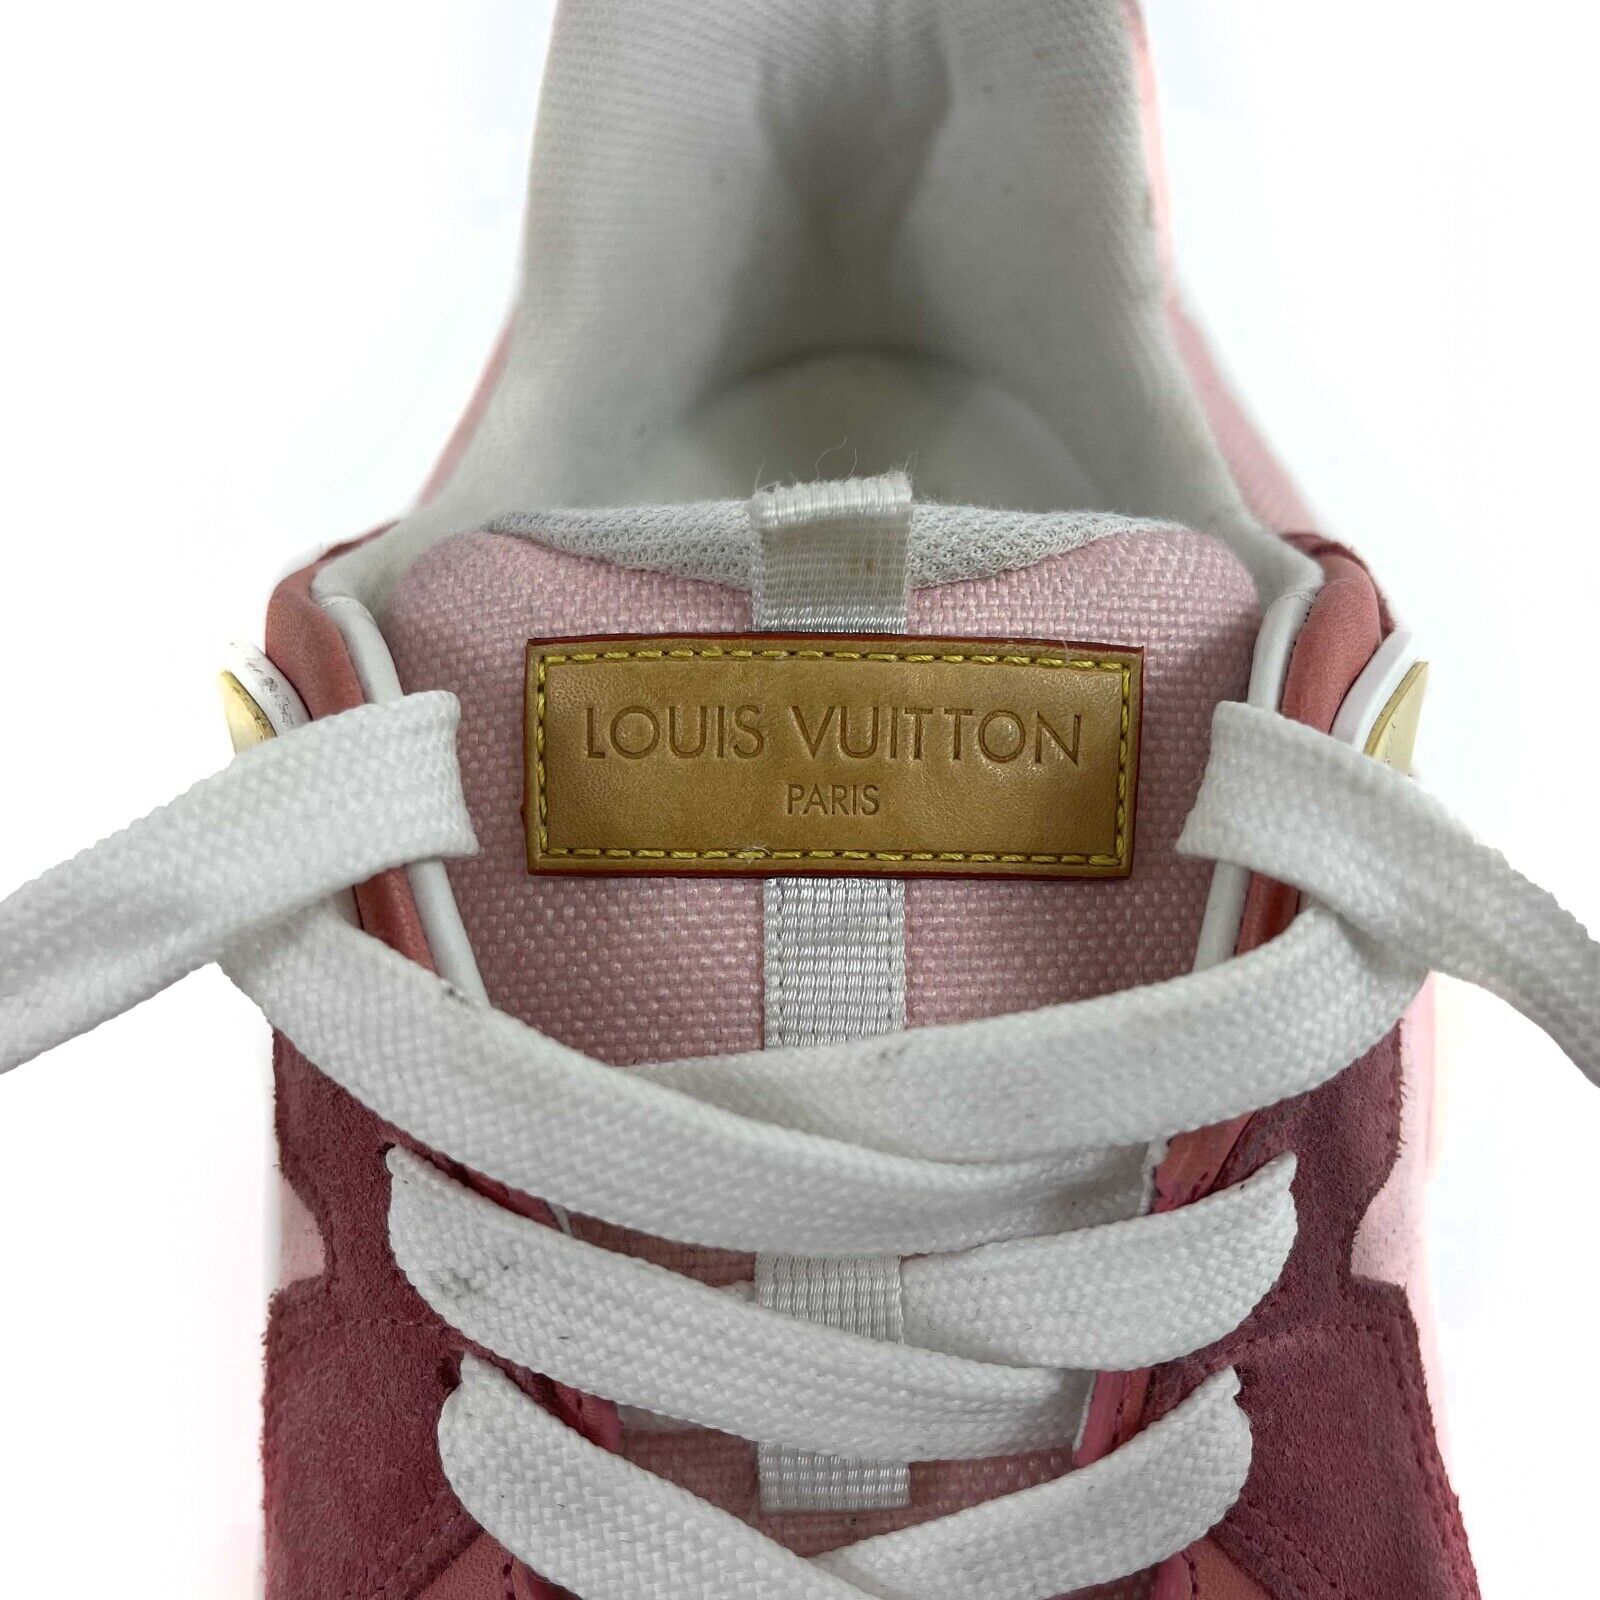 Run away leather trainers Louis Vuitton Pink size 40 EU in Leather